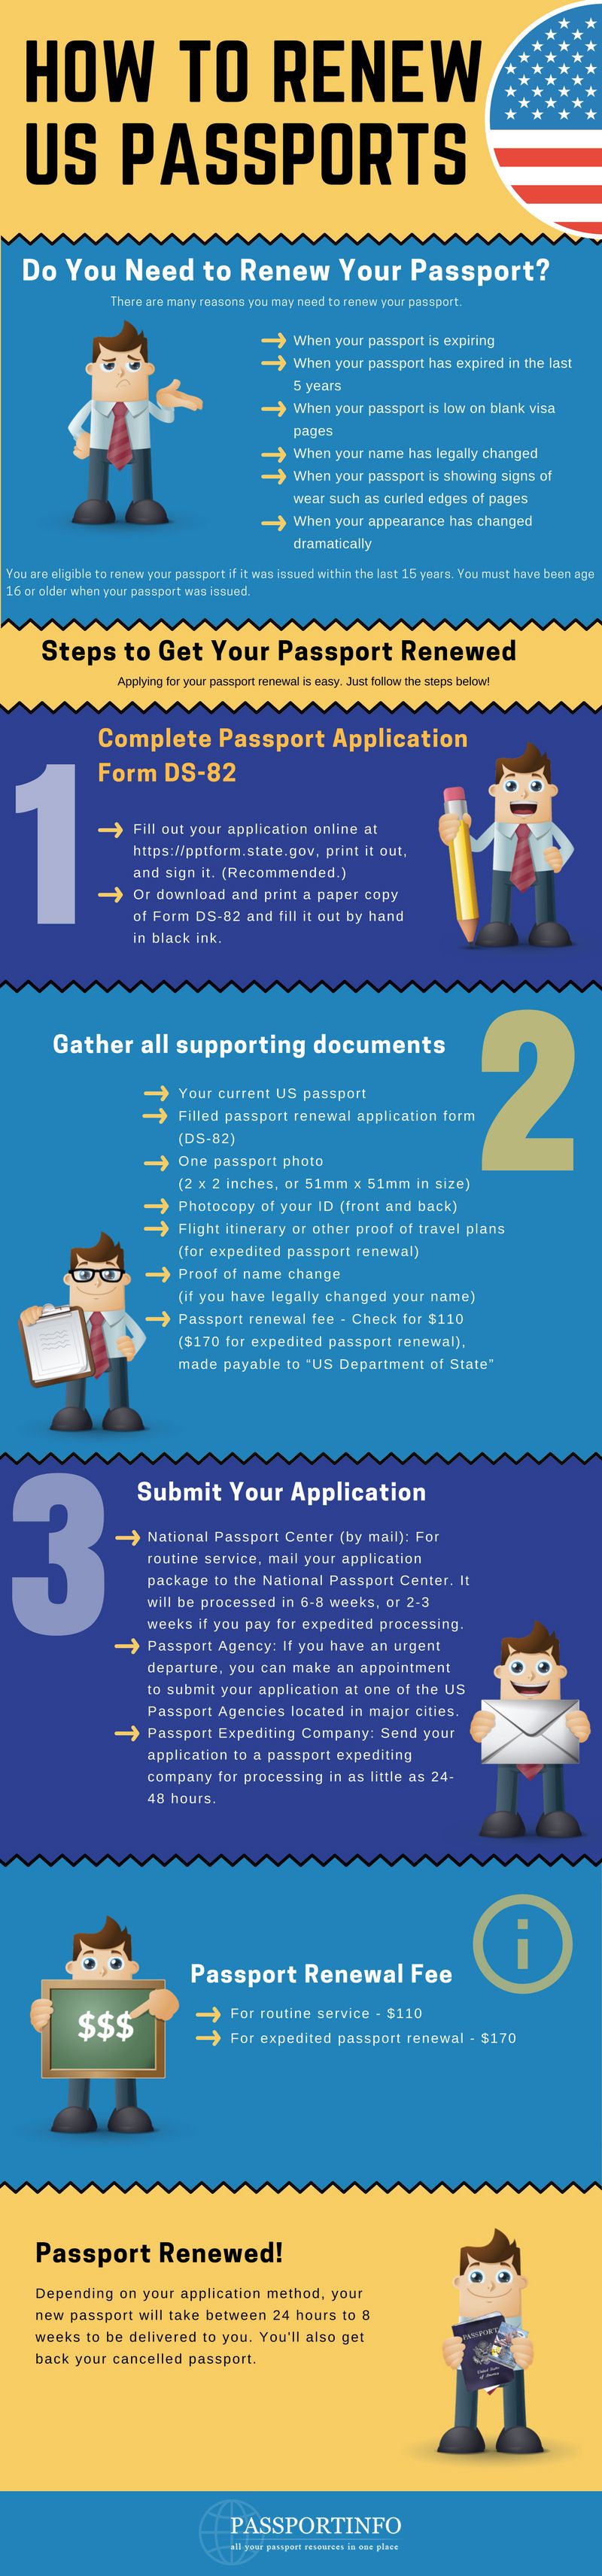 where to go for passport application